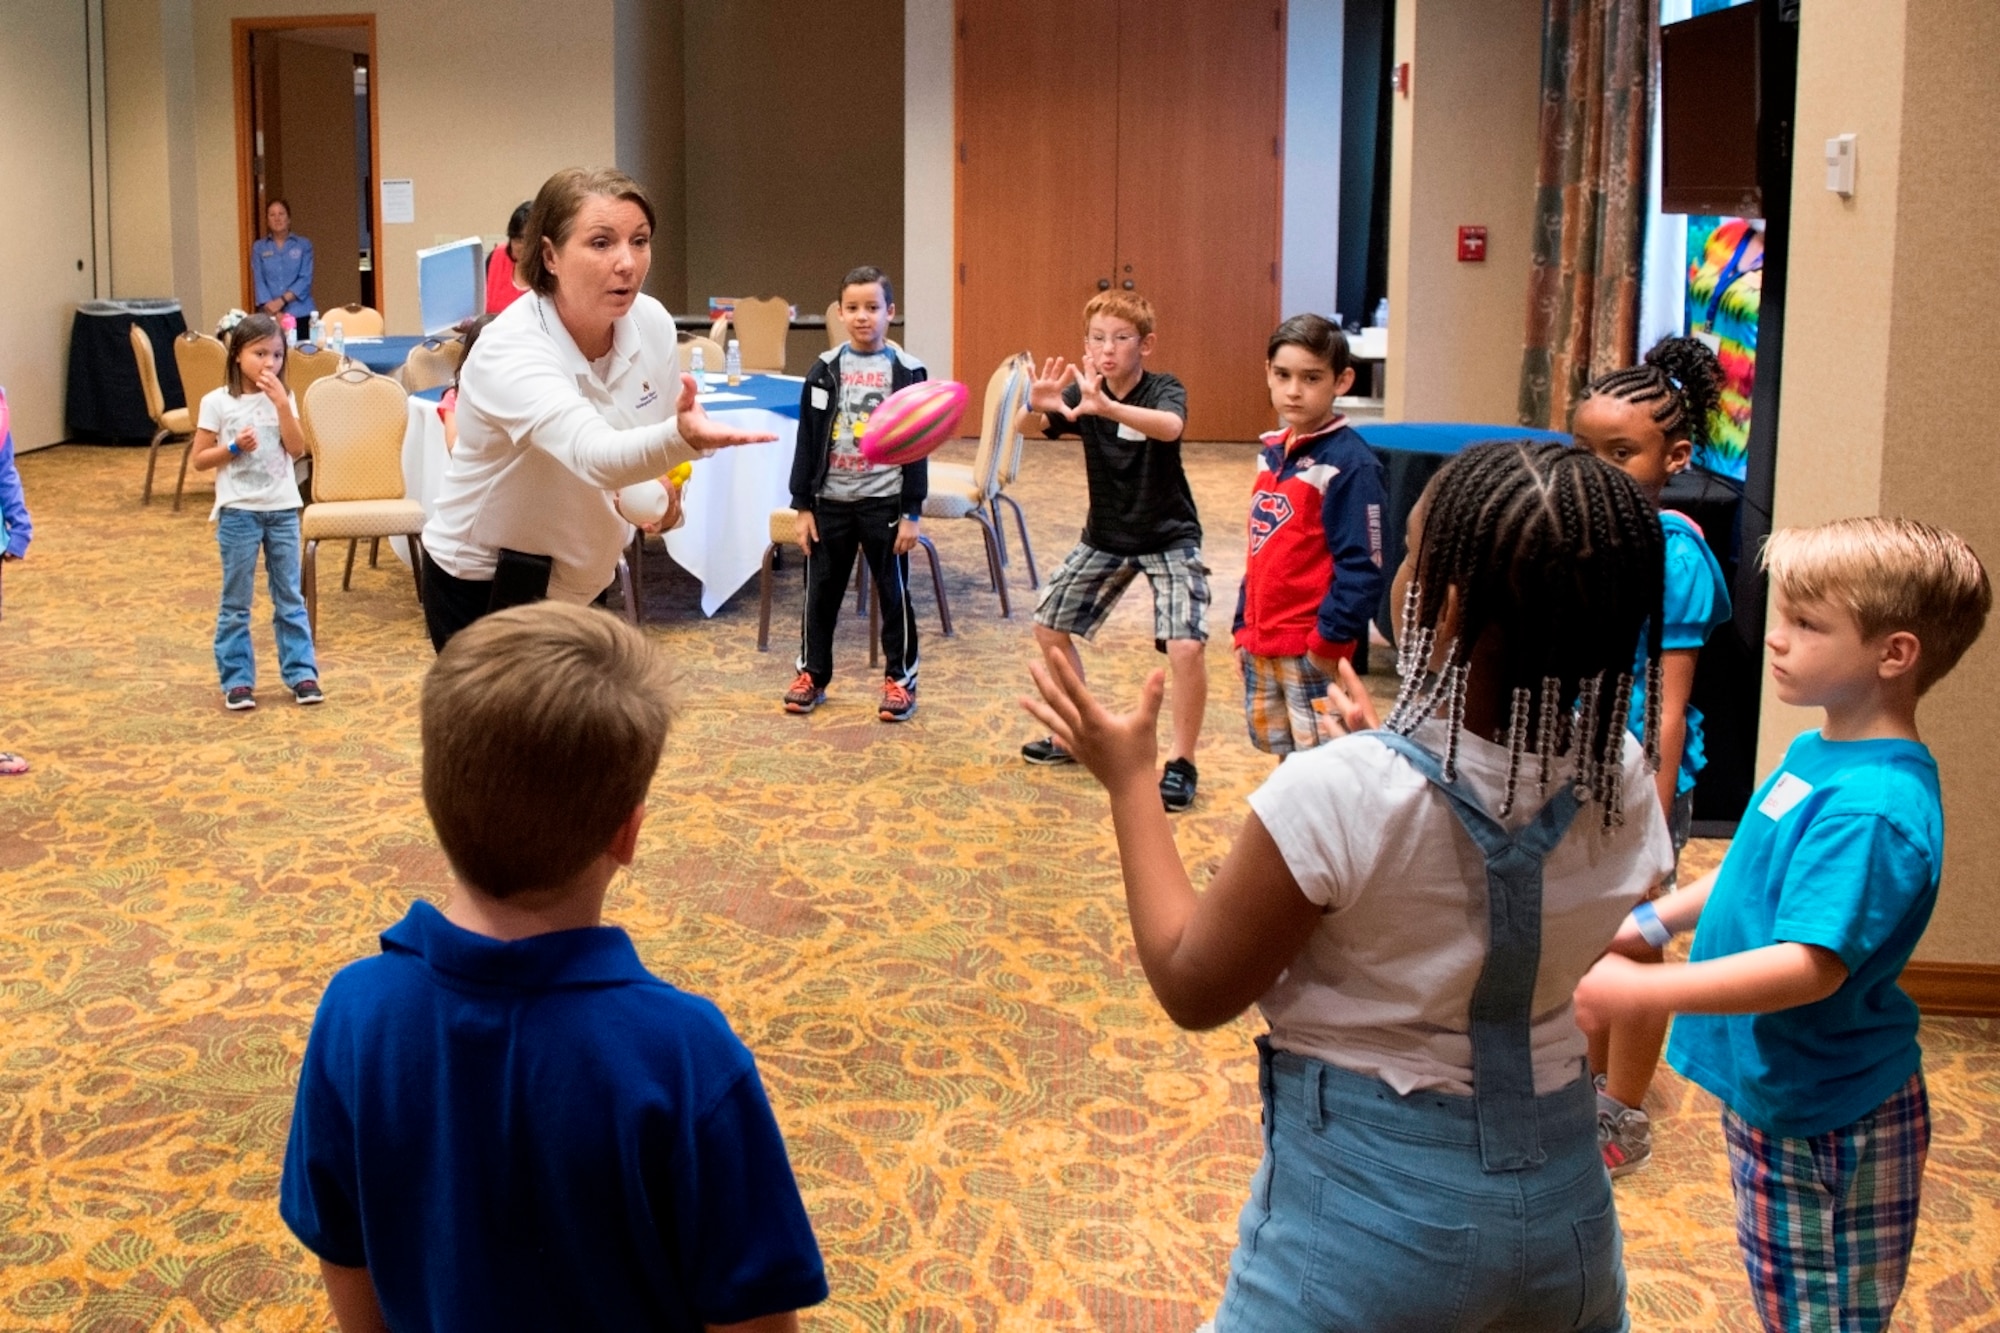 Senior Master Sgt. Jackie Zawada, a program manager with the Air Force Reserve Yellow Ribbon Reintegration Program, plays with children April 23, 2016, during a game used to teach communication skills at a Yellow Ribbon event in Dallas. During the event, children had an opportunity to tell their stories and share their feelings about their parent's recent deployments. (U.S. Air Force photo by Tech. Sgt. Benjamin Mota)
	 
